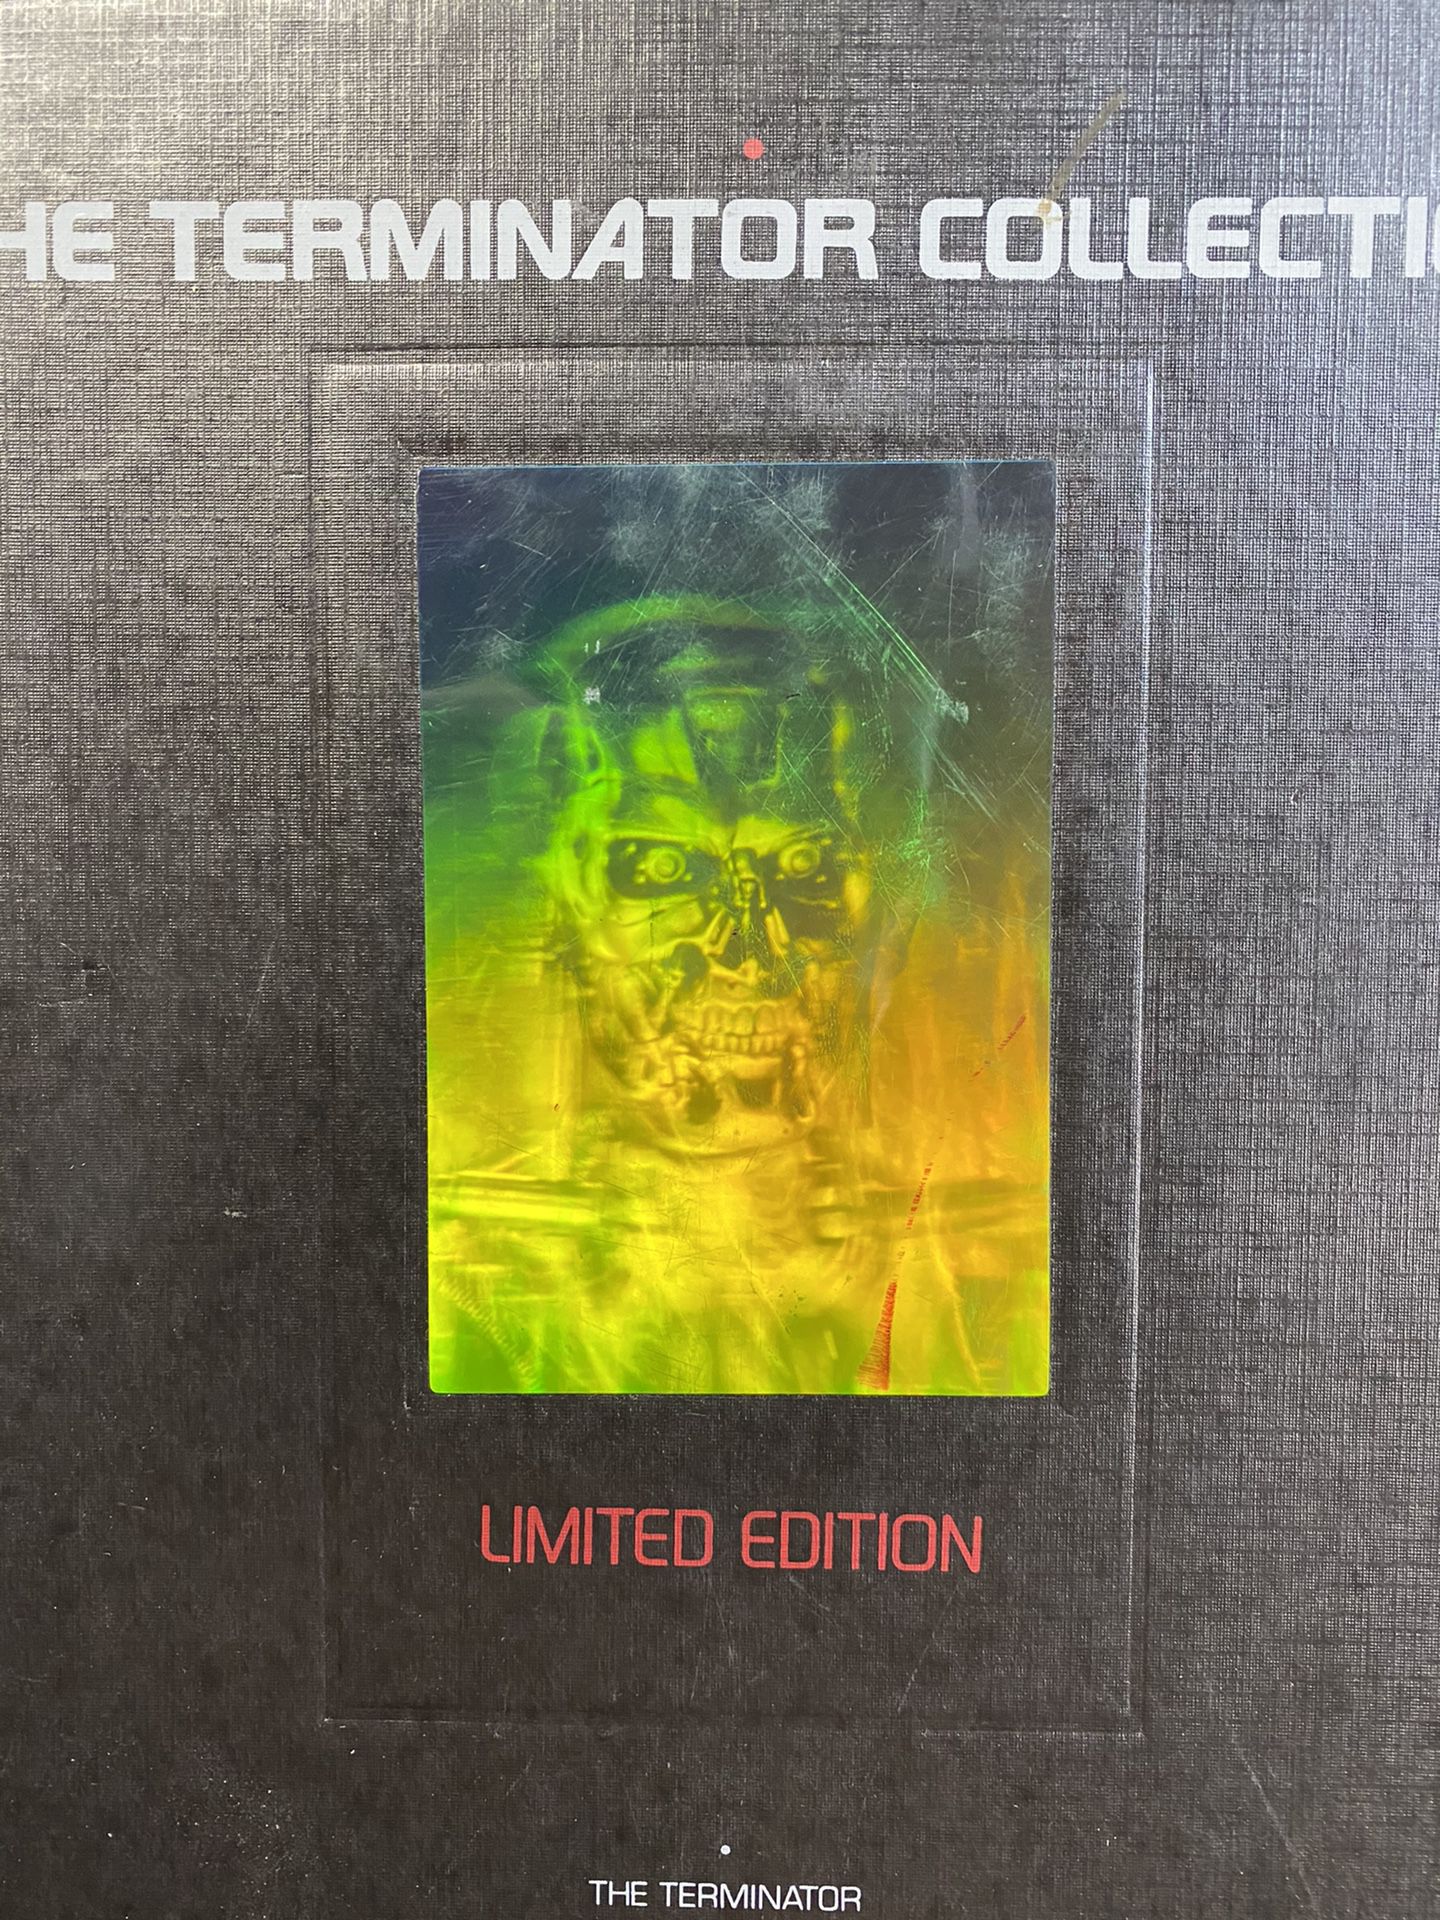 The terminator collection limited edition vhs set